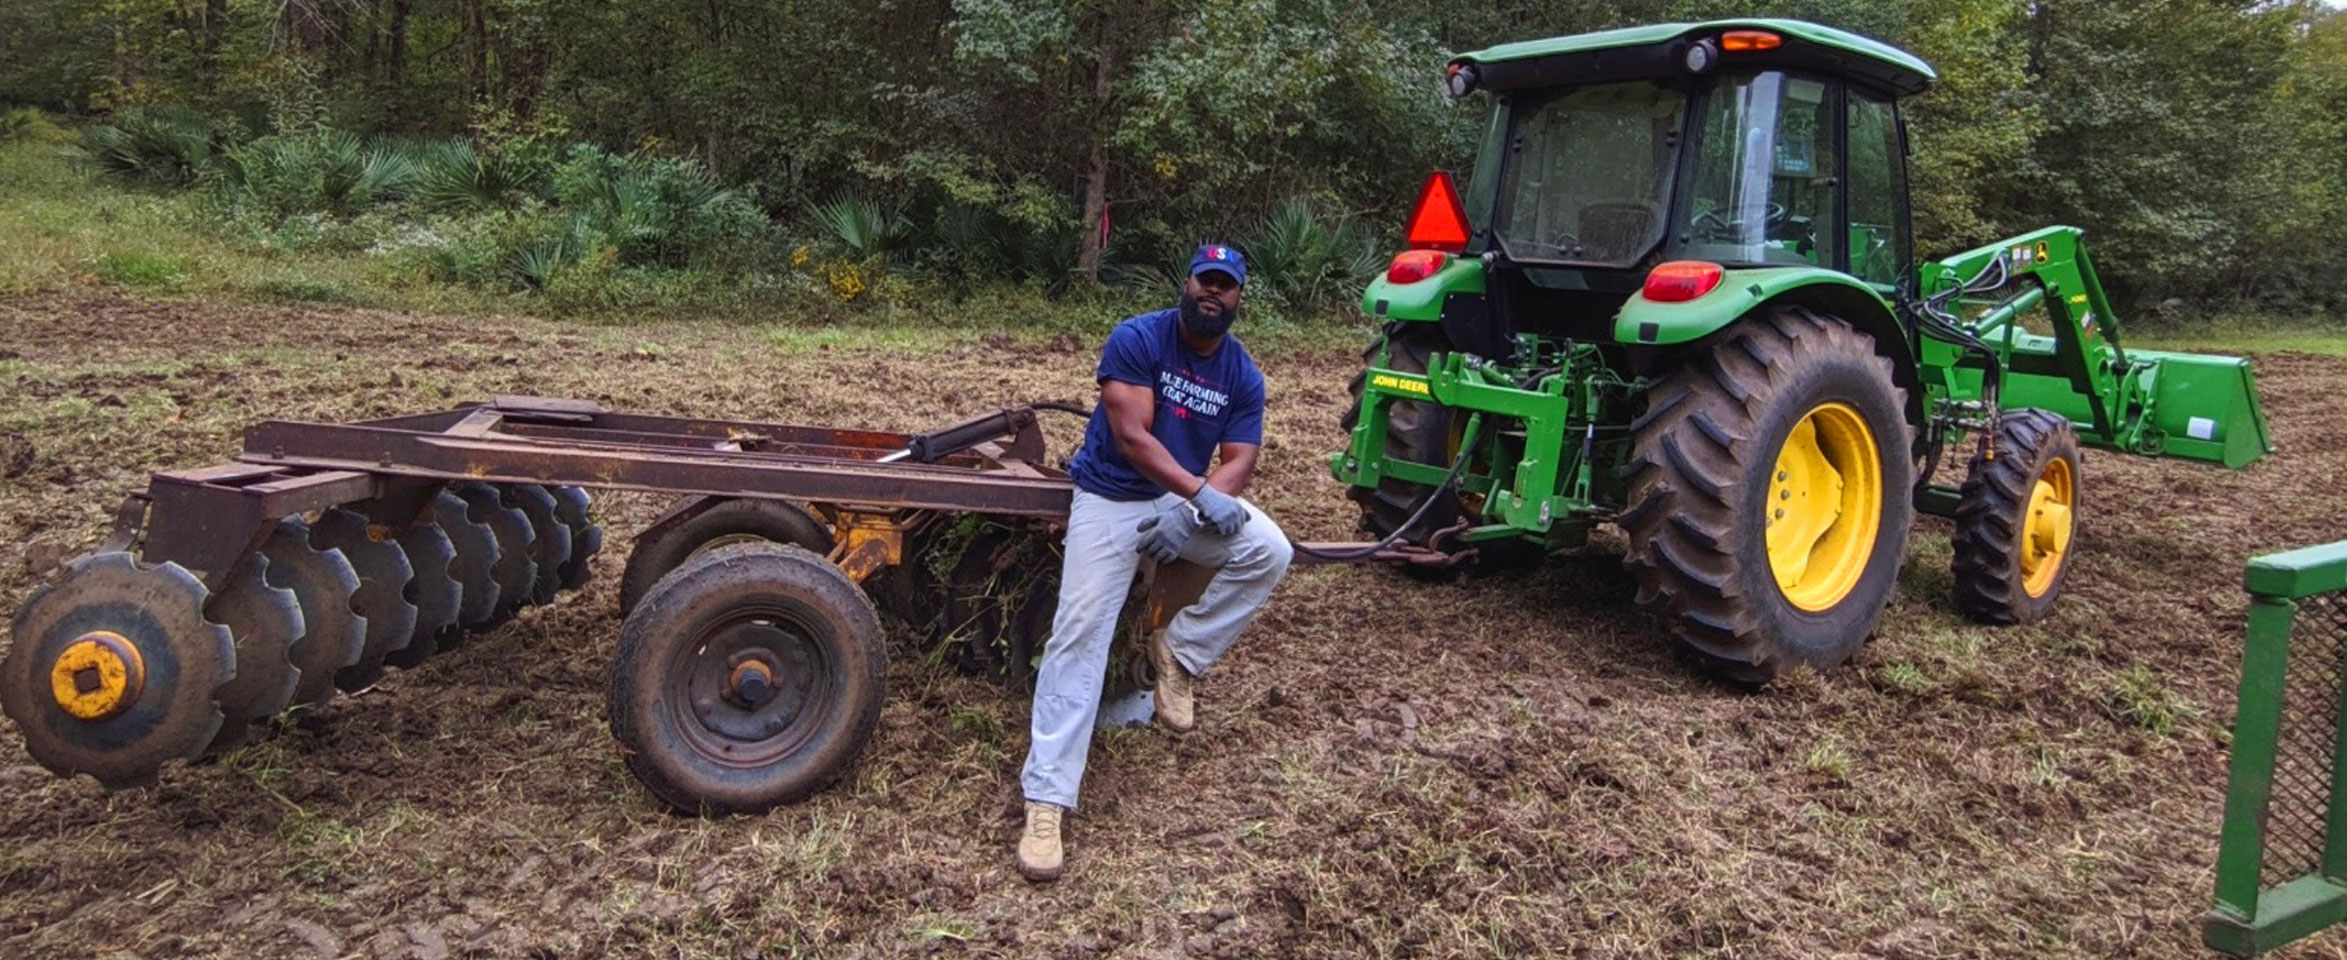 Christopher Joe, AL, wearing a blue t-shirt that says “Make Farming Great Again” and light blue jeans leaning on tractor equipment.